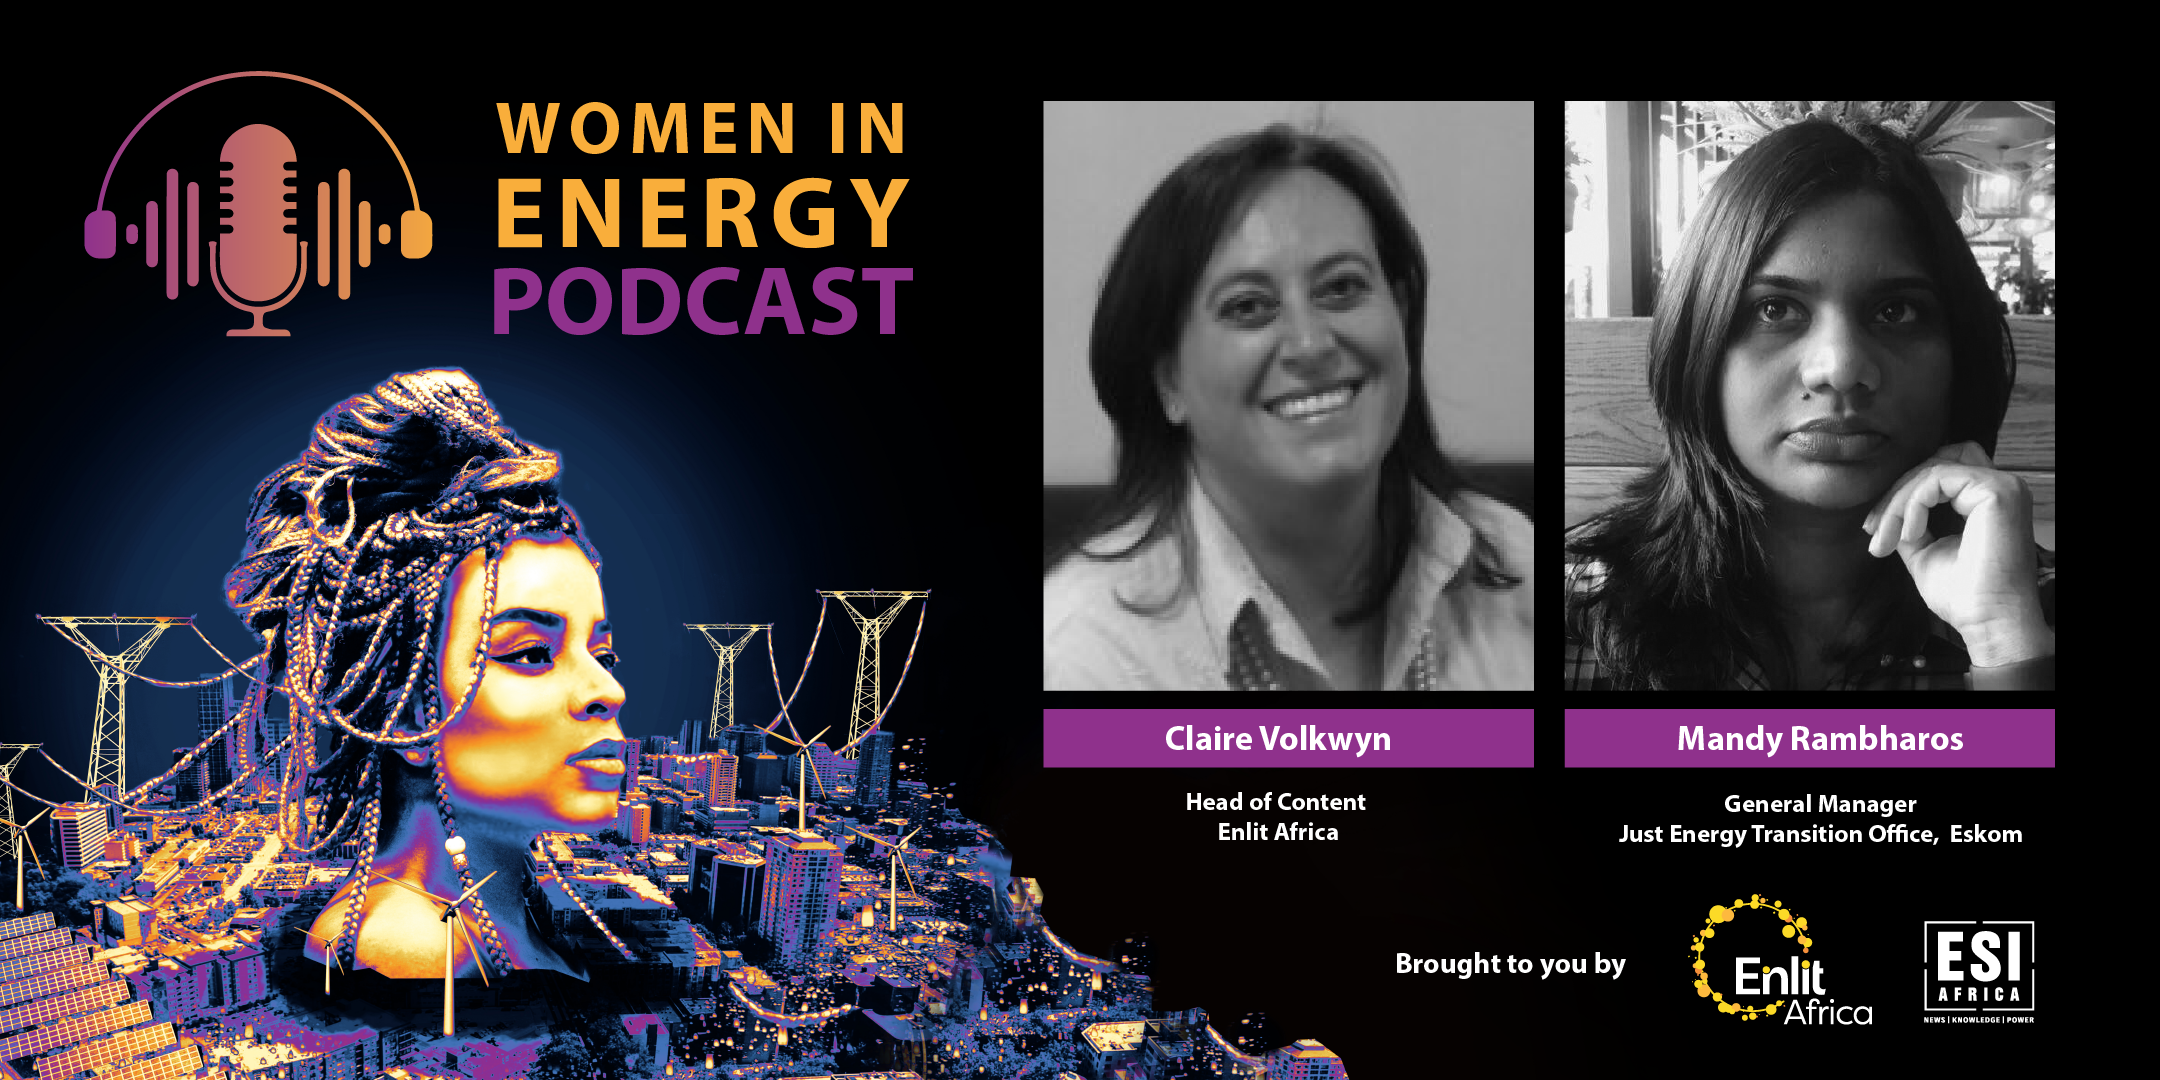 Women in Energy: An interview with Mandy Rambharos